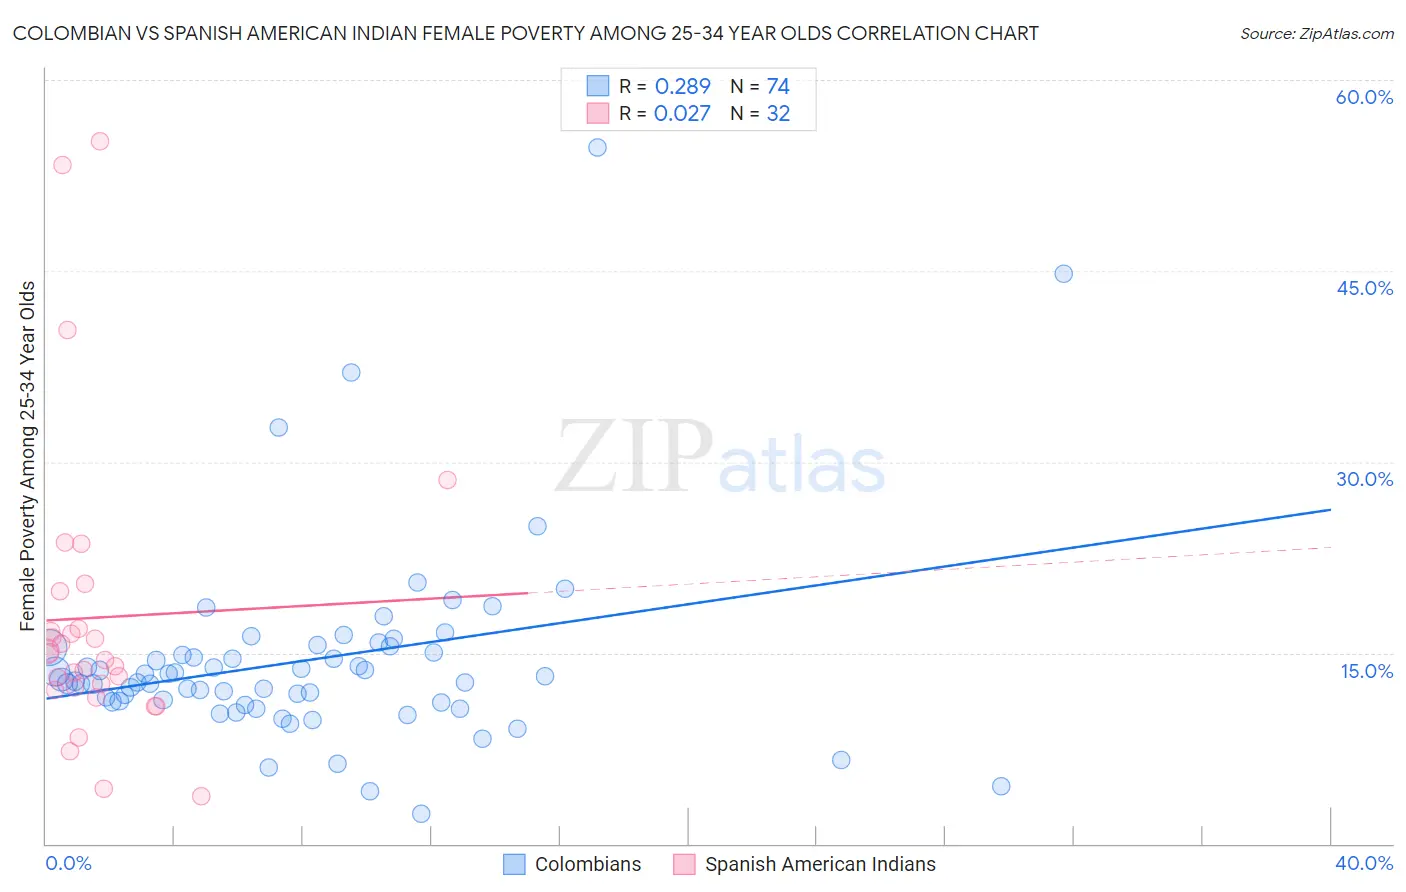 Colombian vs Spanish American Indian Female Poverty Among 25-34 Year Olds